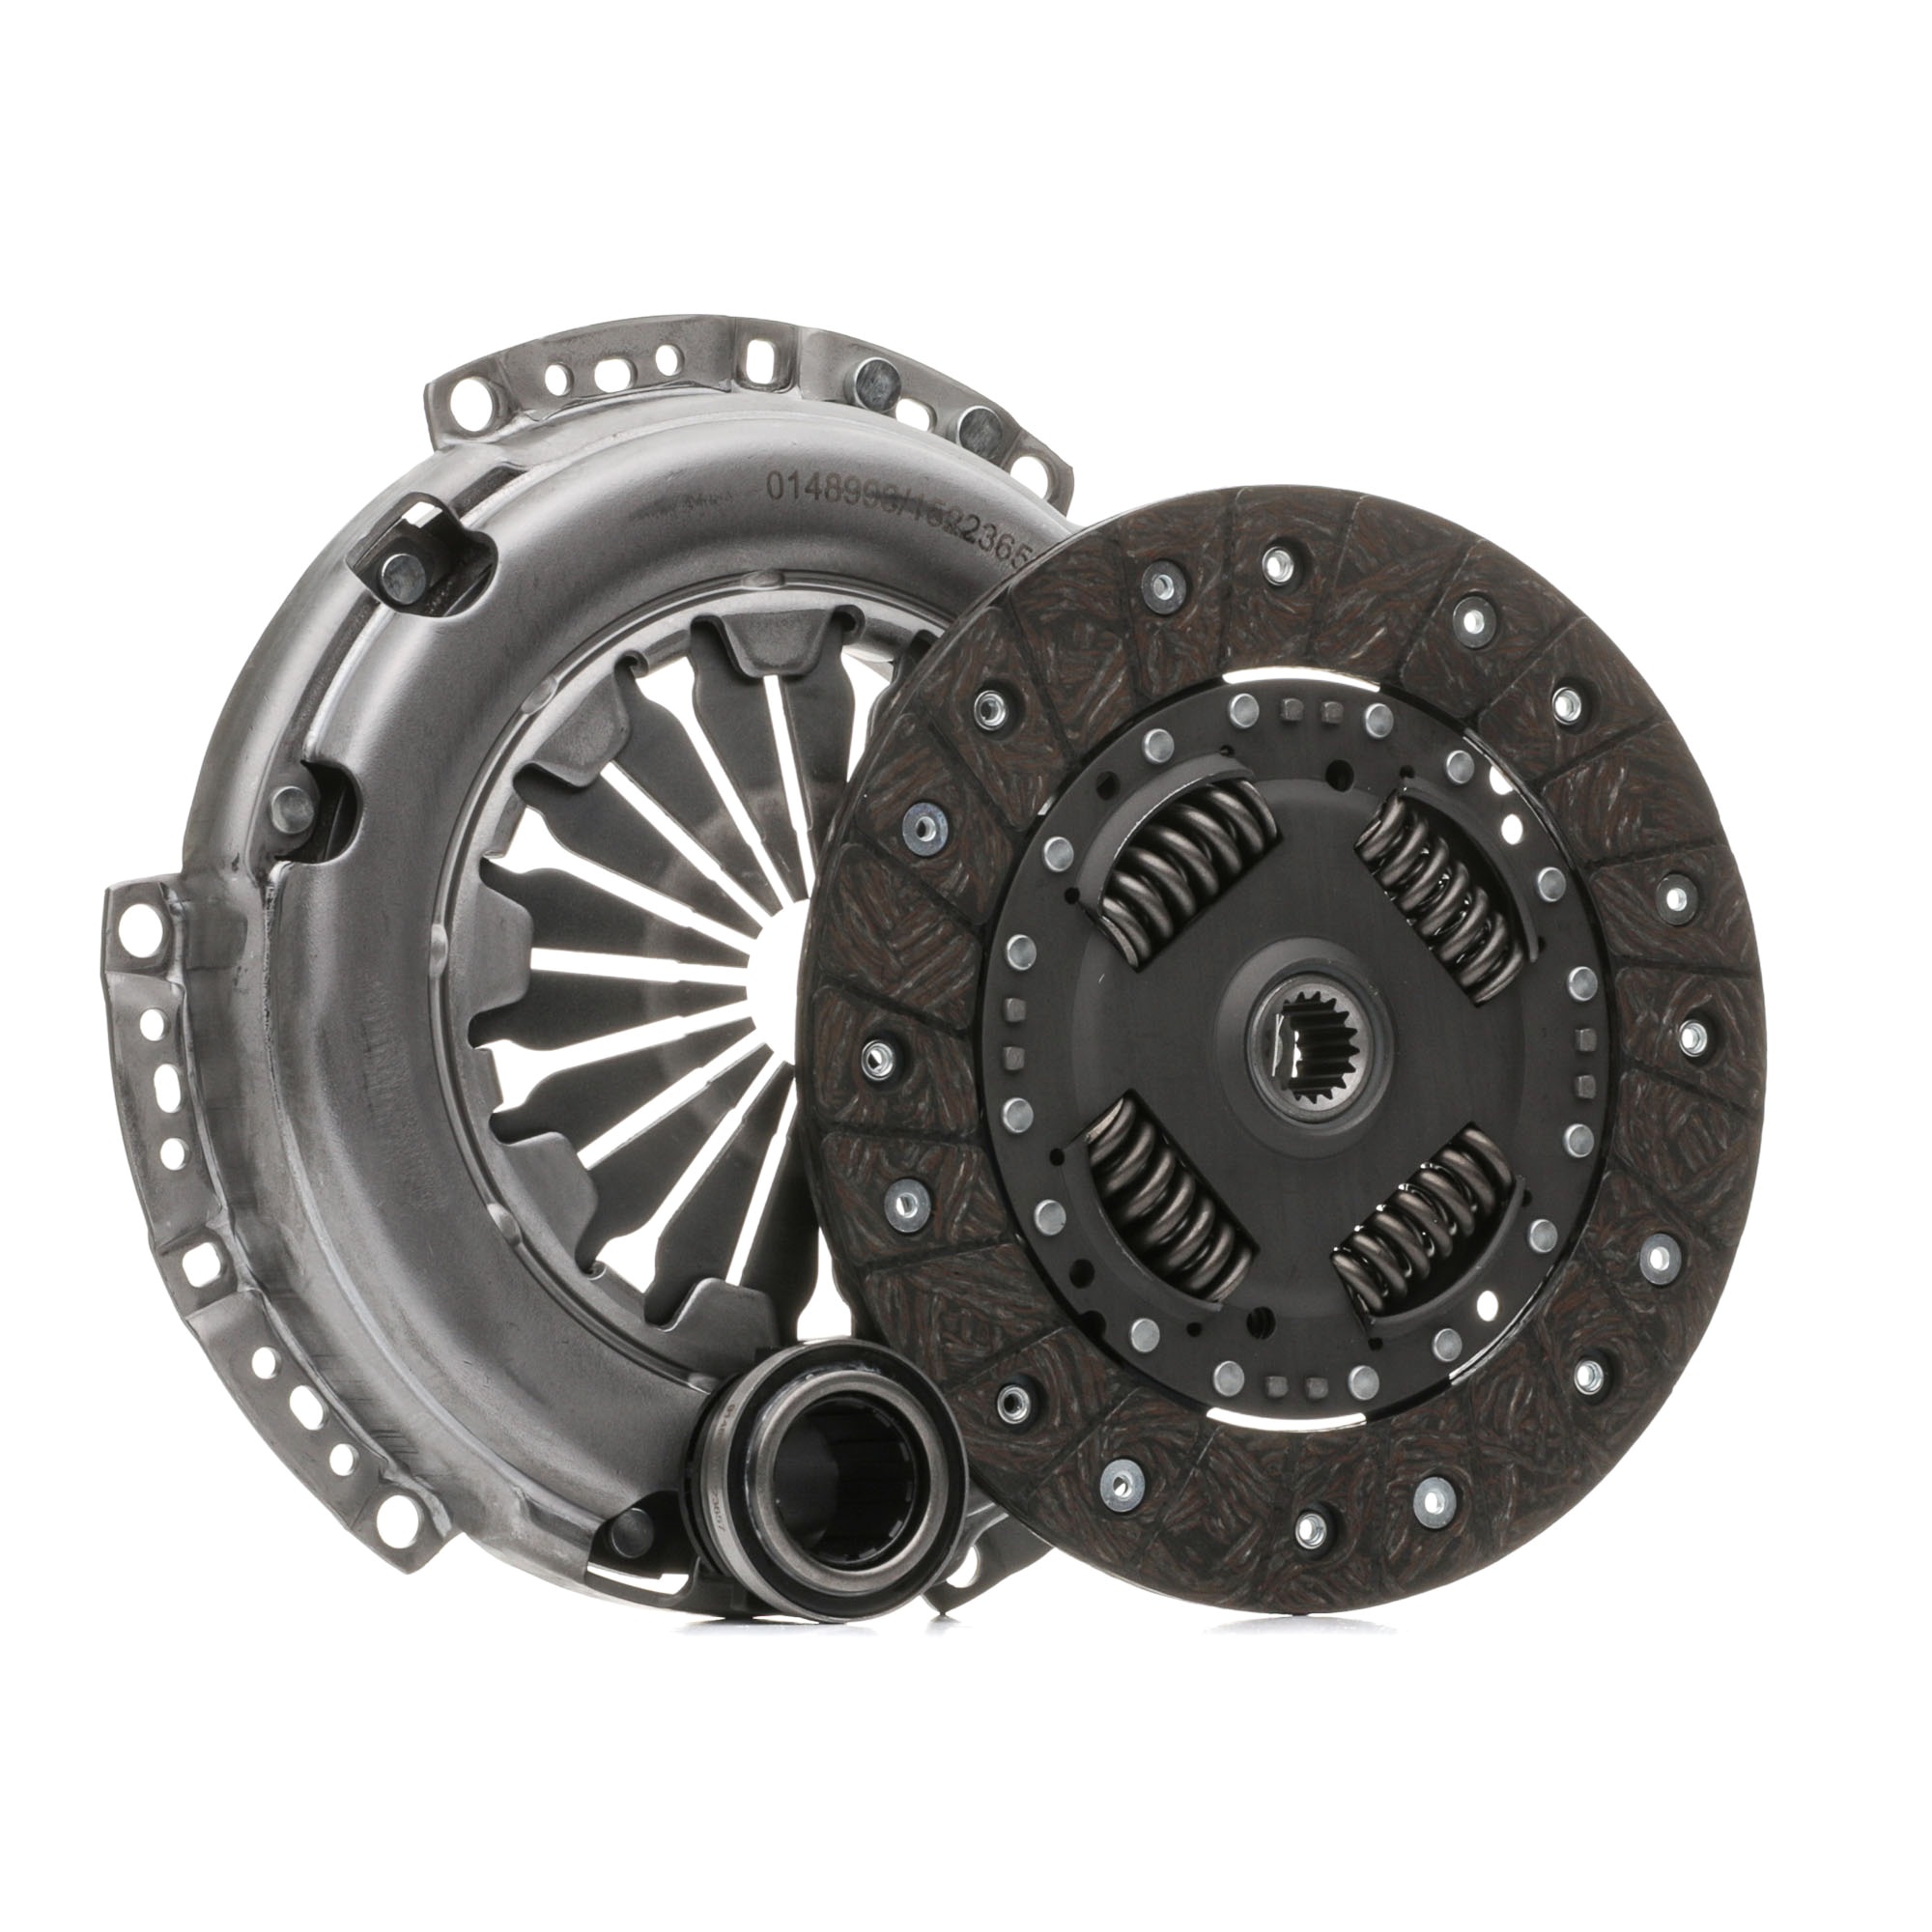 STARK SKCK-0100435 Clutch kit MINI experience and price